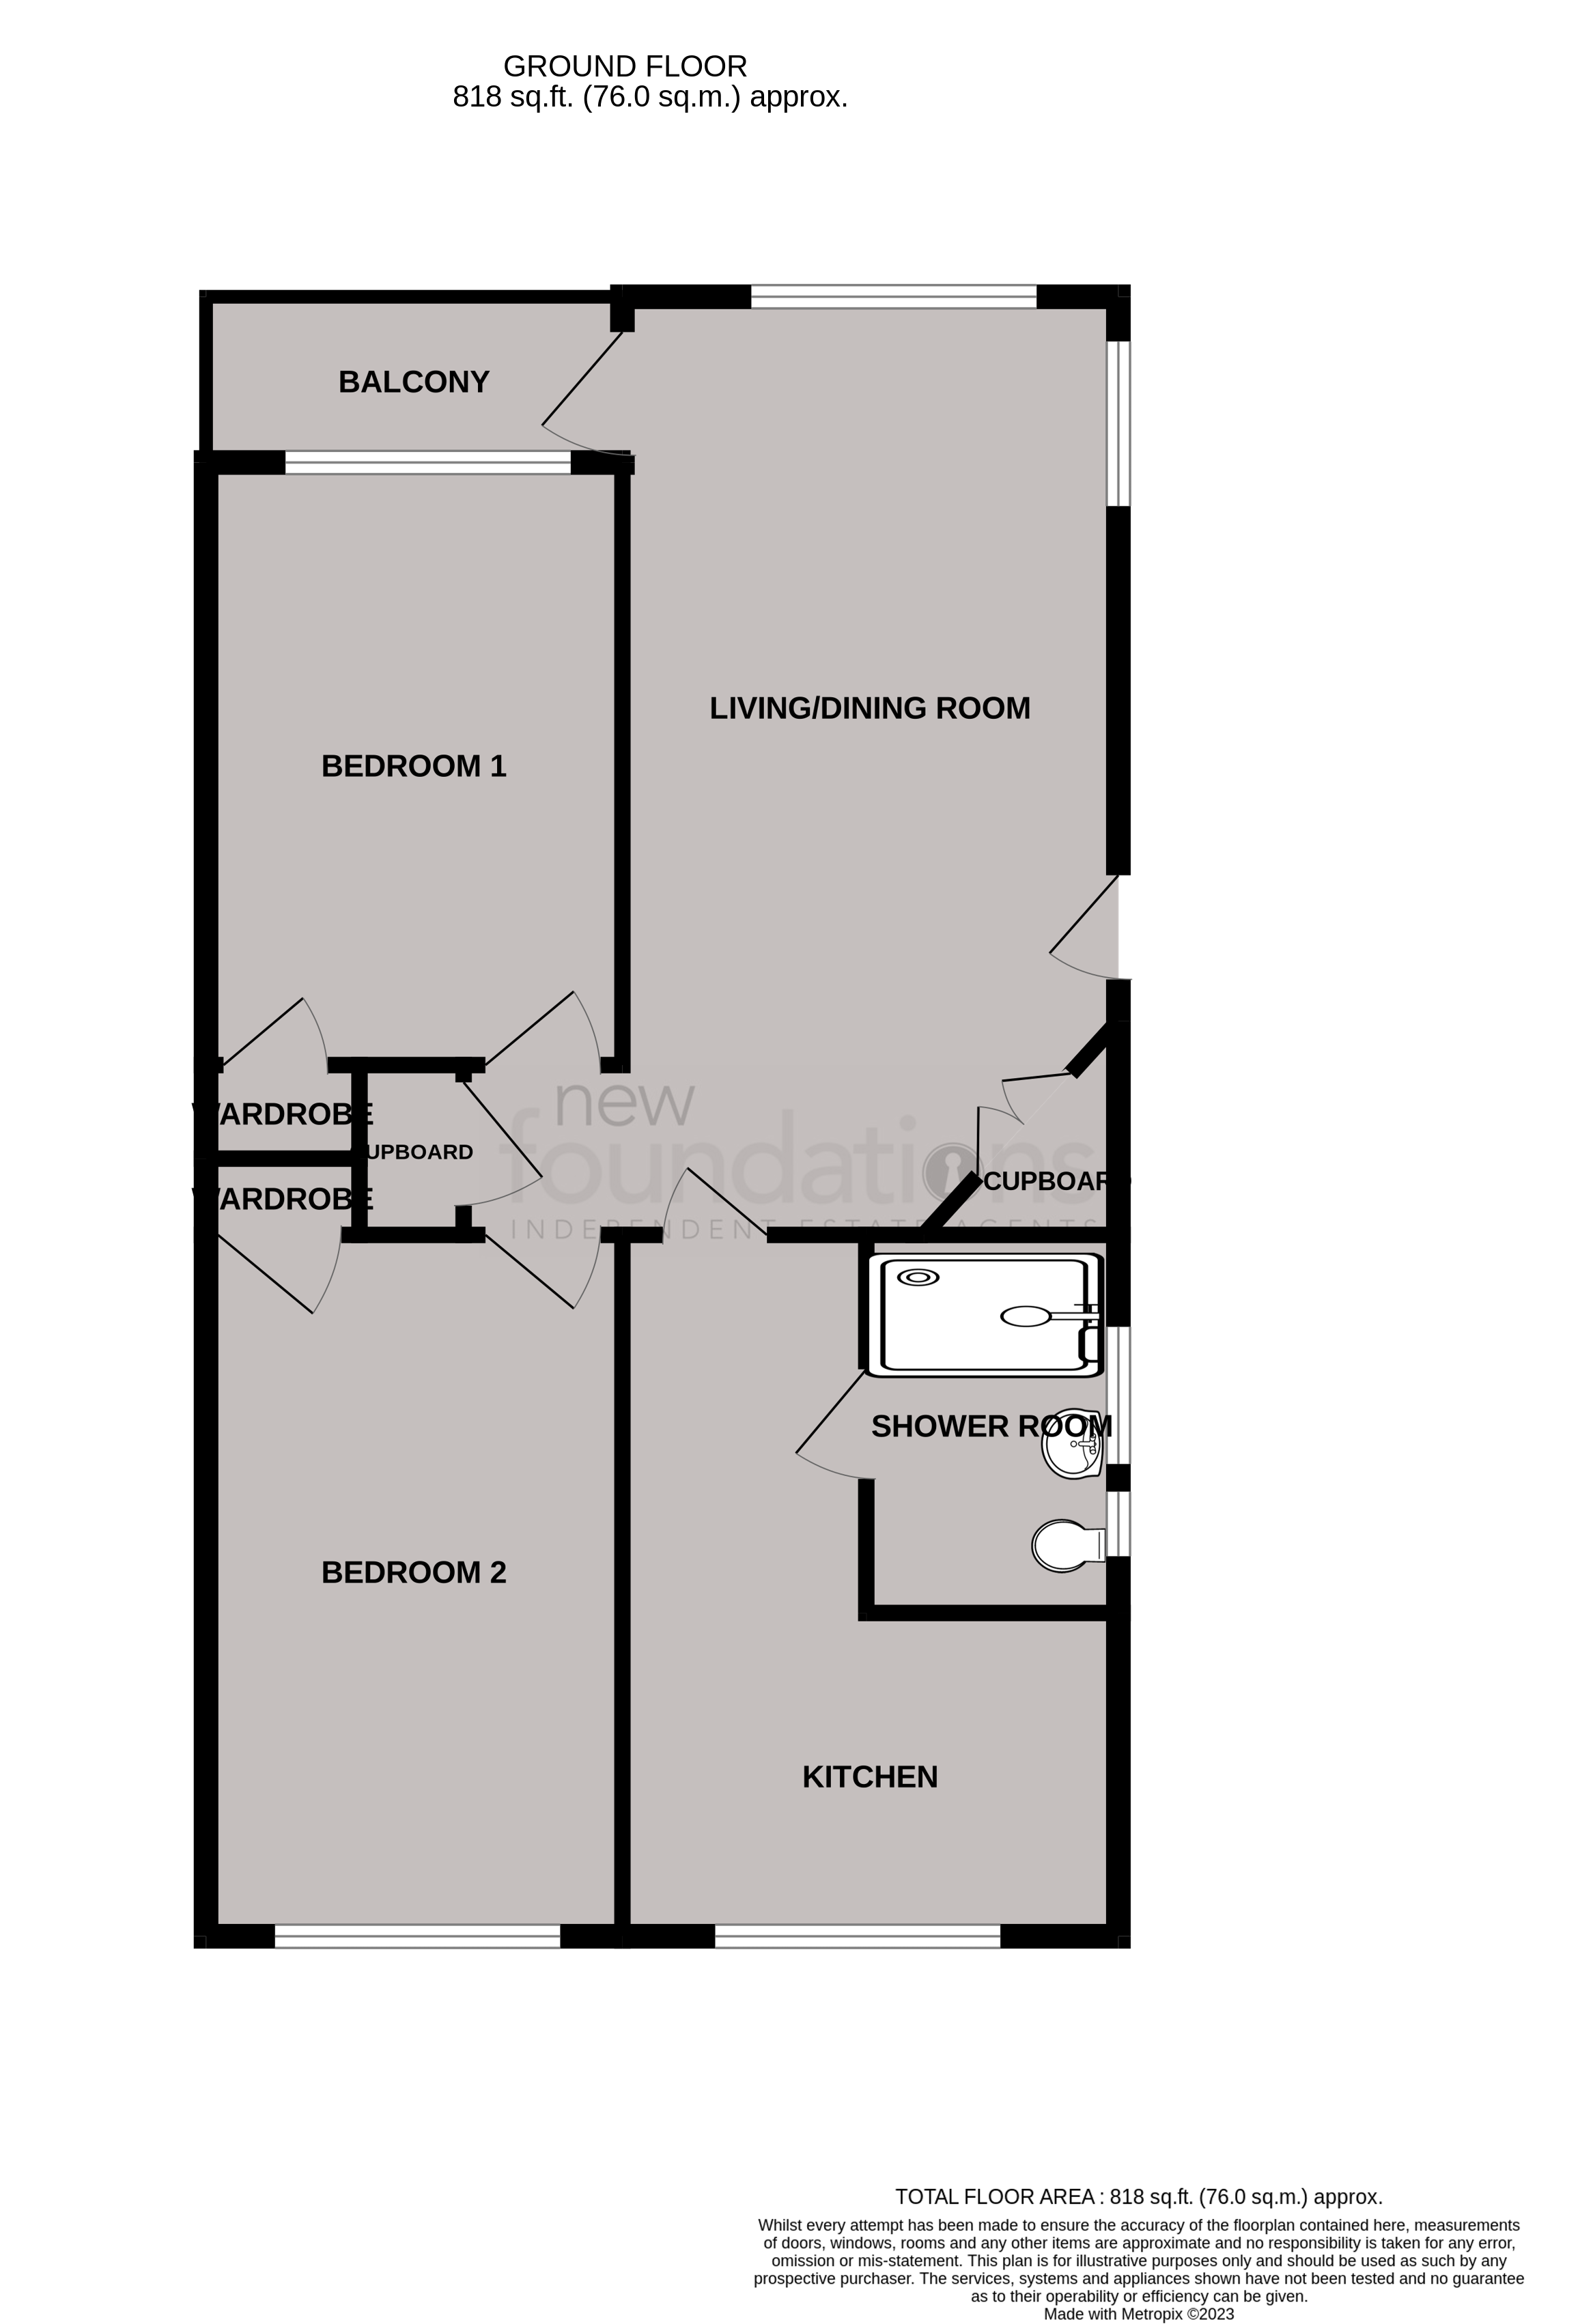 Floorplans For West Parade, Bexhill-on-Sea, East Sussex